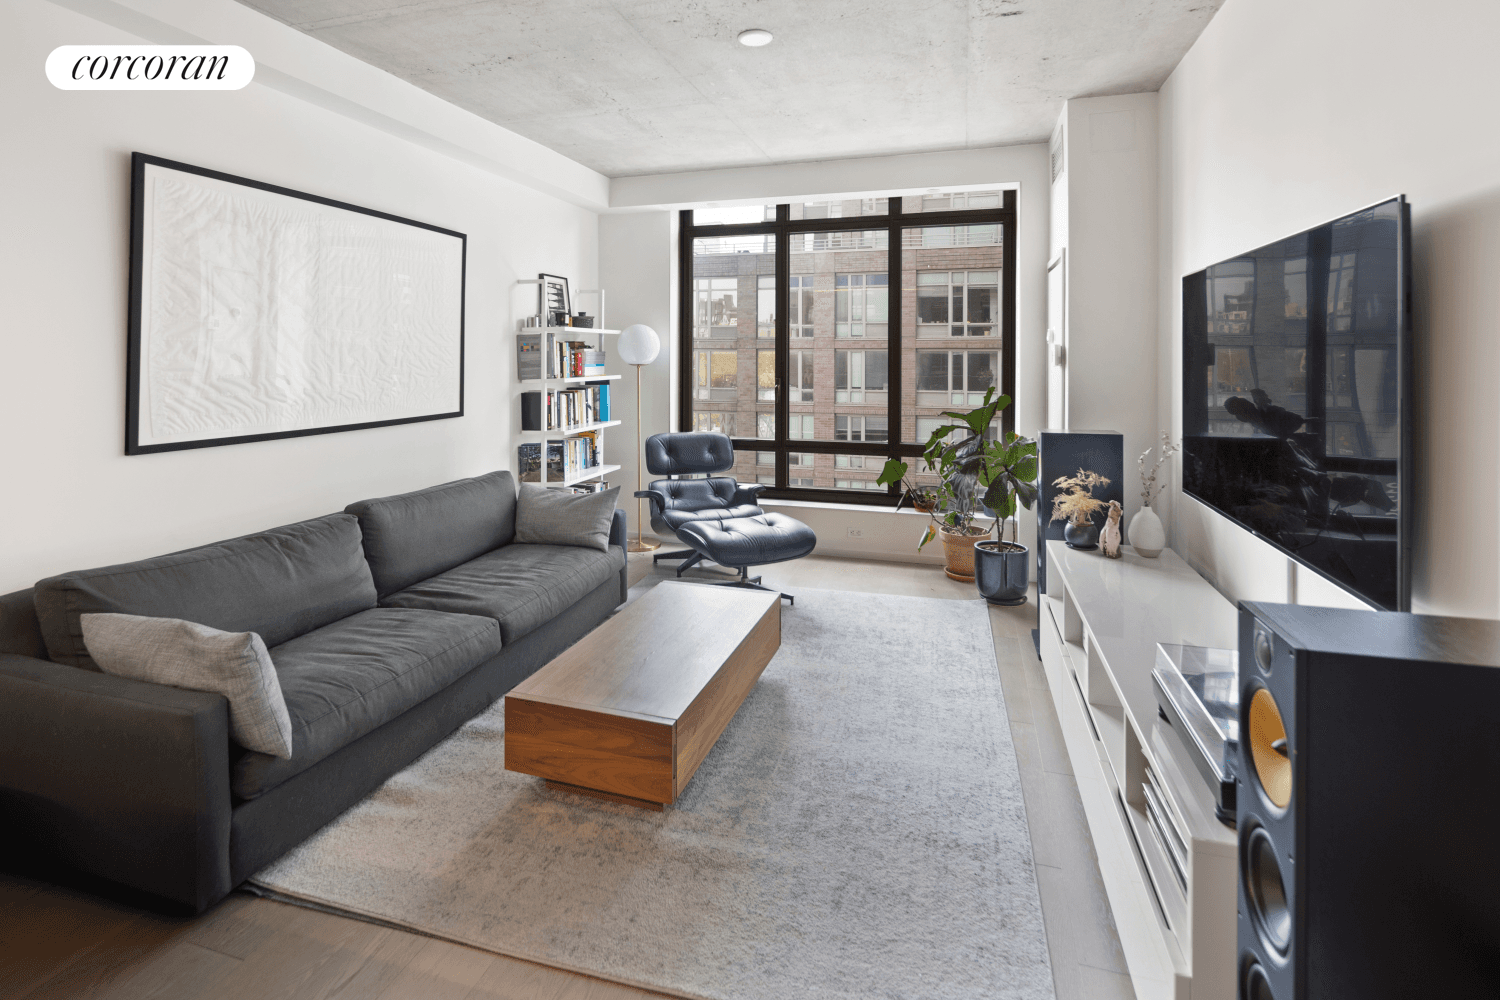 Step into the heart of the Lower East Side with this one bedroom, one bathroom condominium residence.